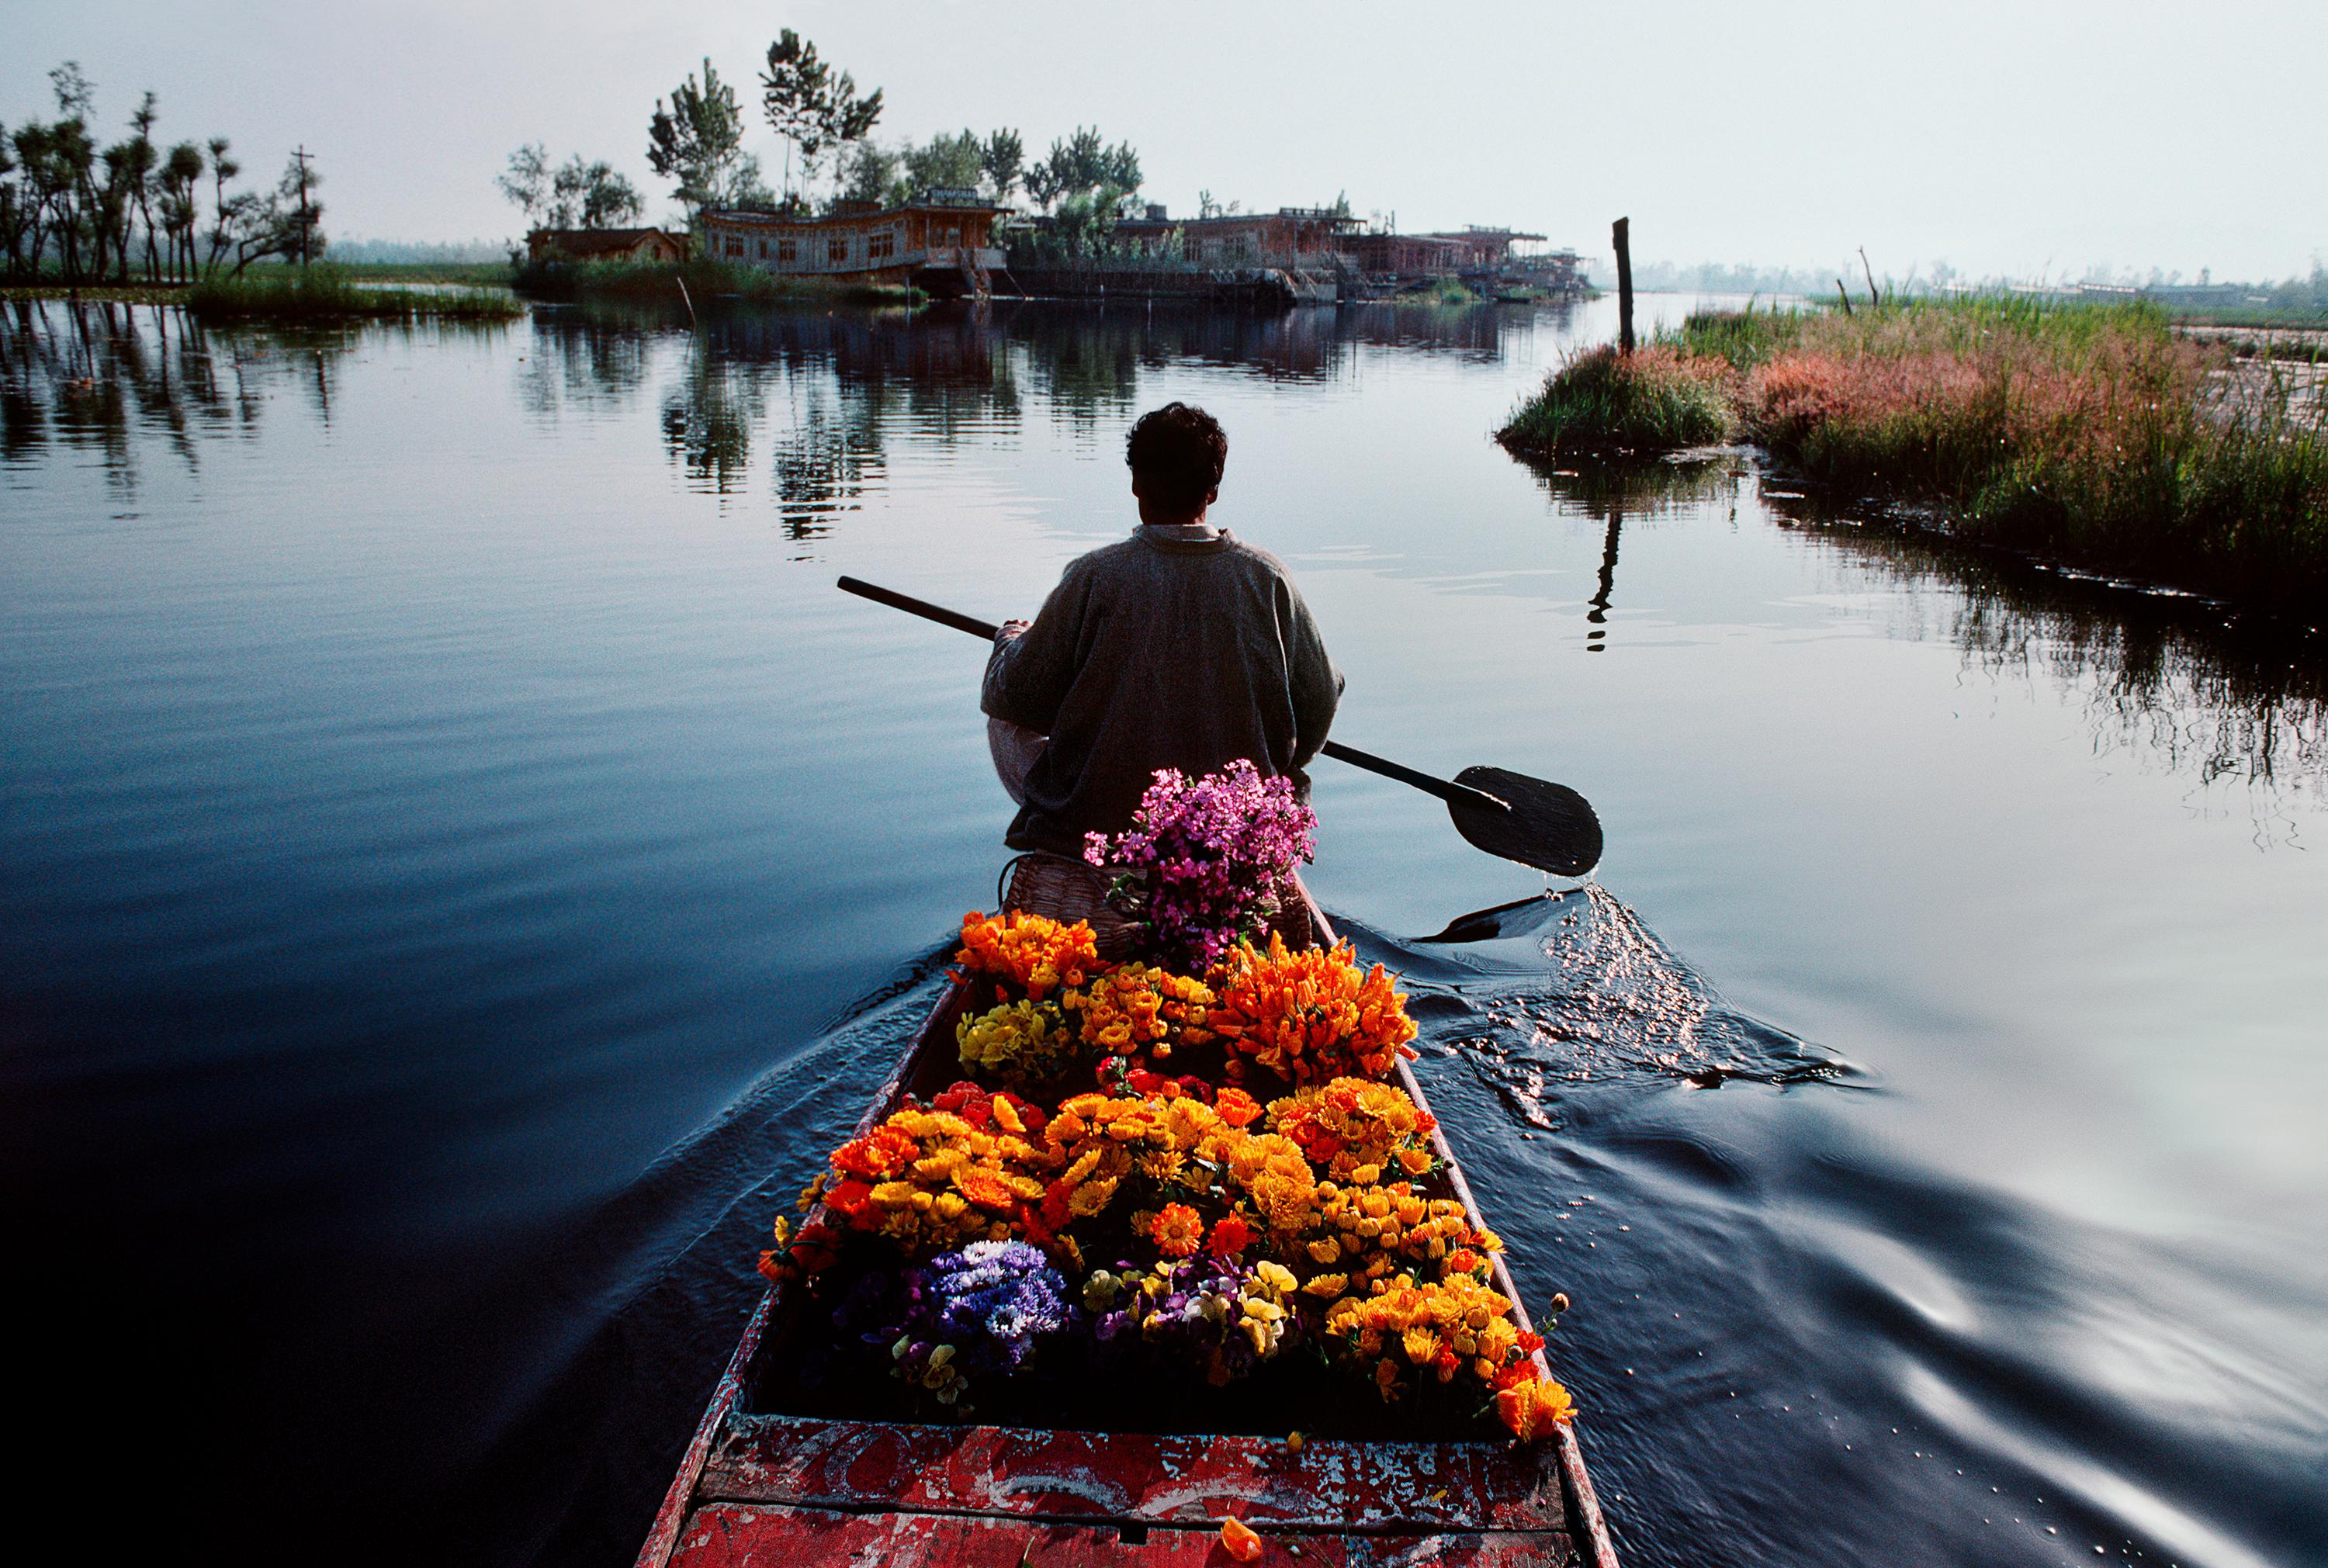 Rowing on Dal Lake - Photograph by Steve McCurry